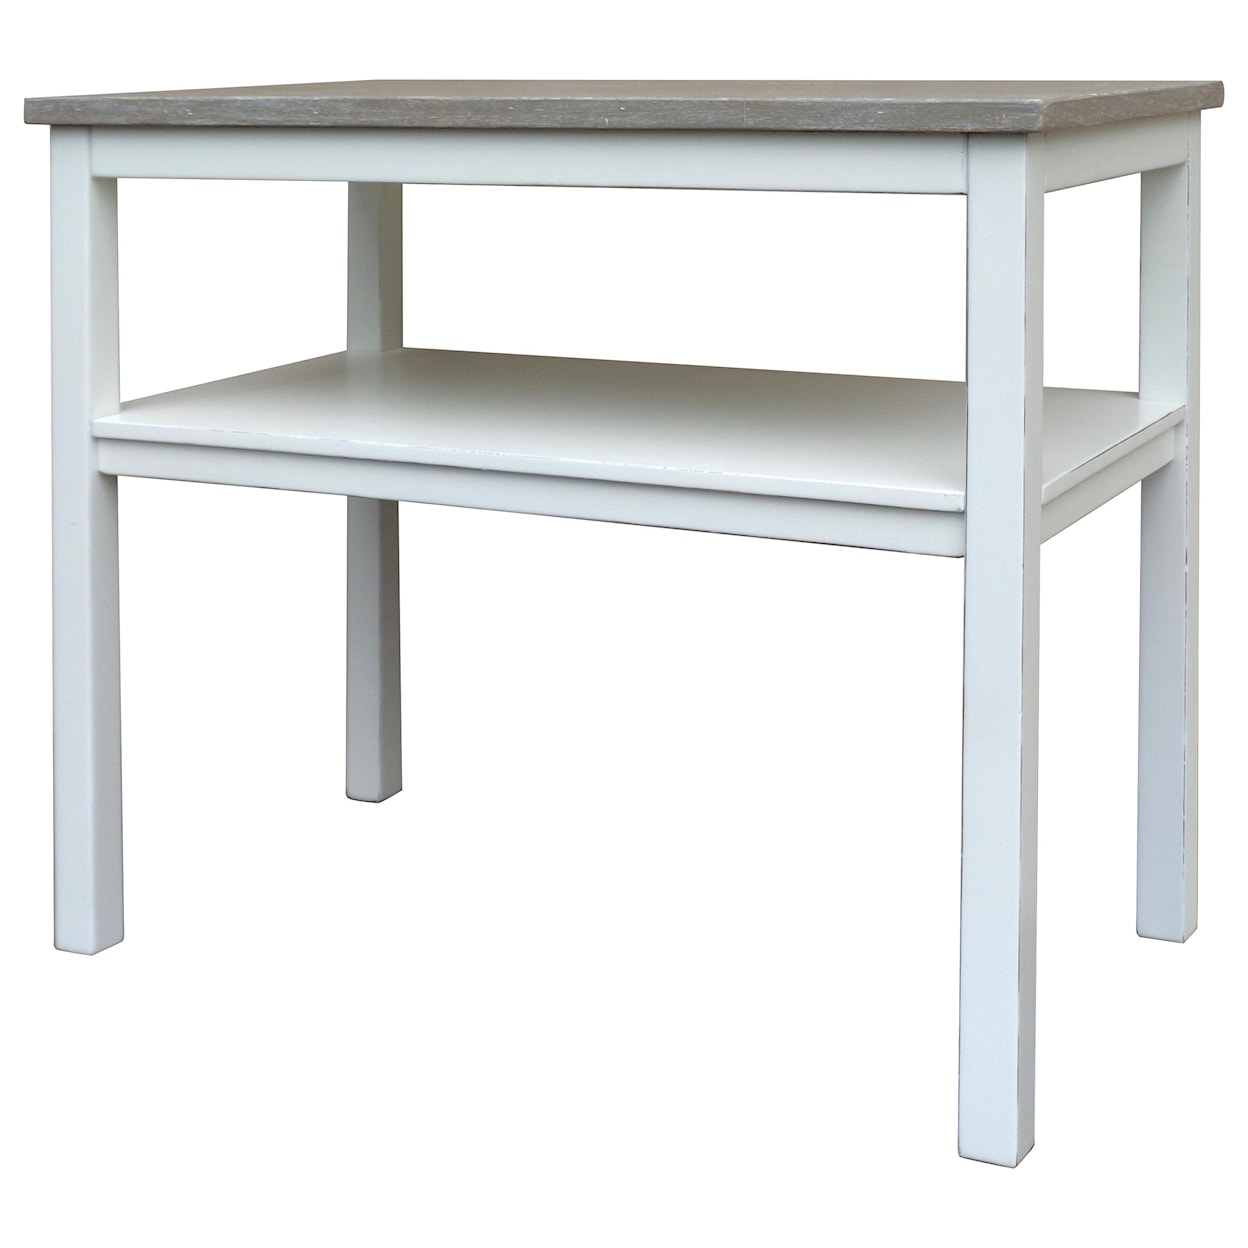 Trade Winds Furniture Occasional Table Groups Studio Chairside Table